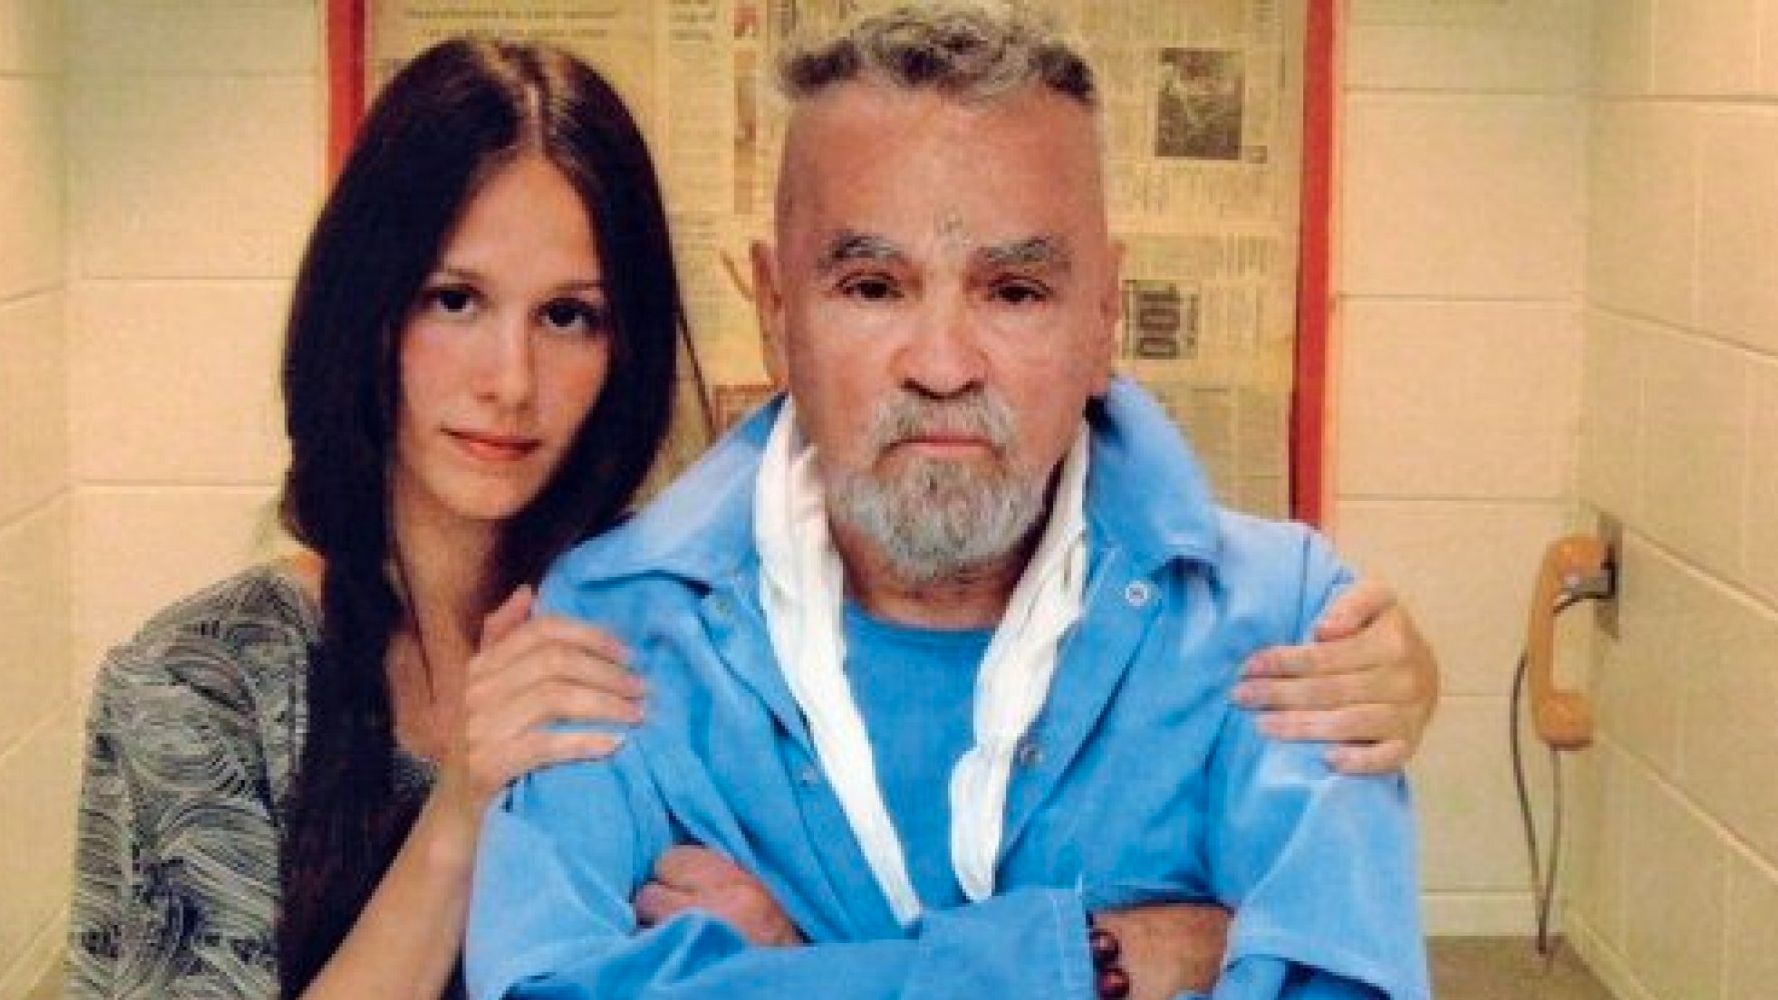 Charles Manson Due To Marry Afton Elaine Burton But Why Might A Woman